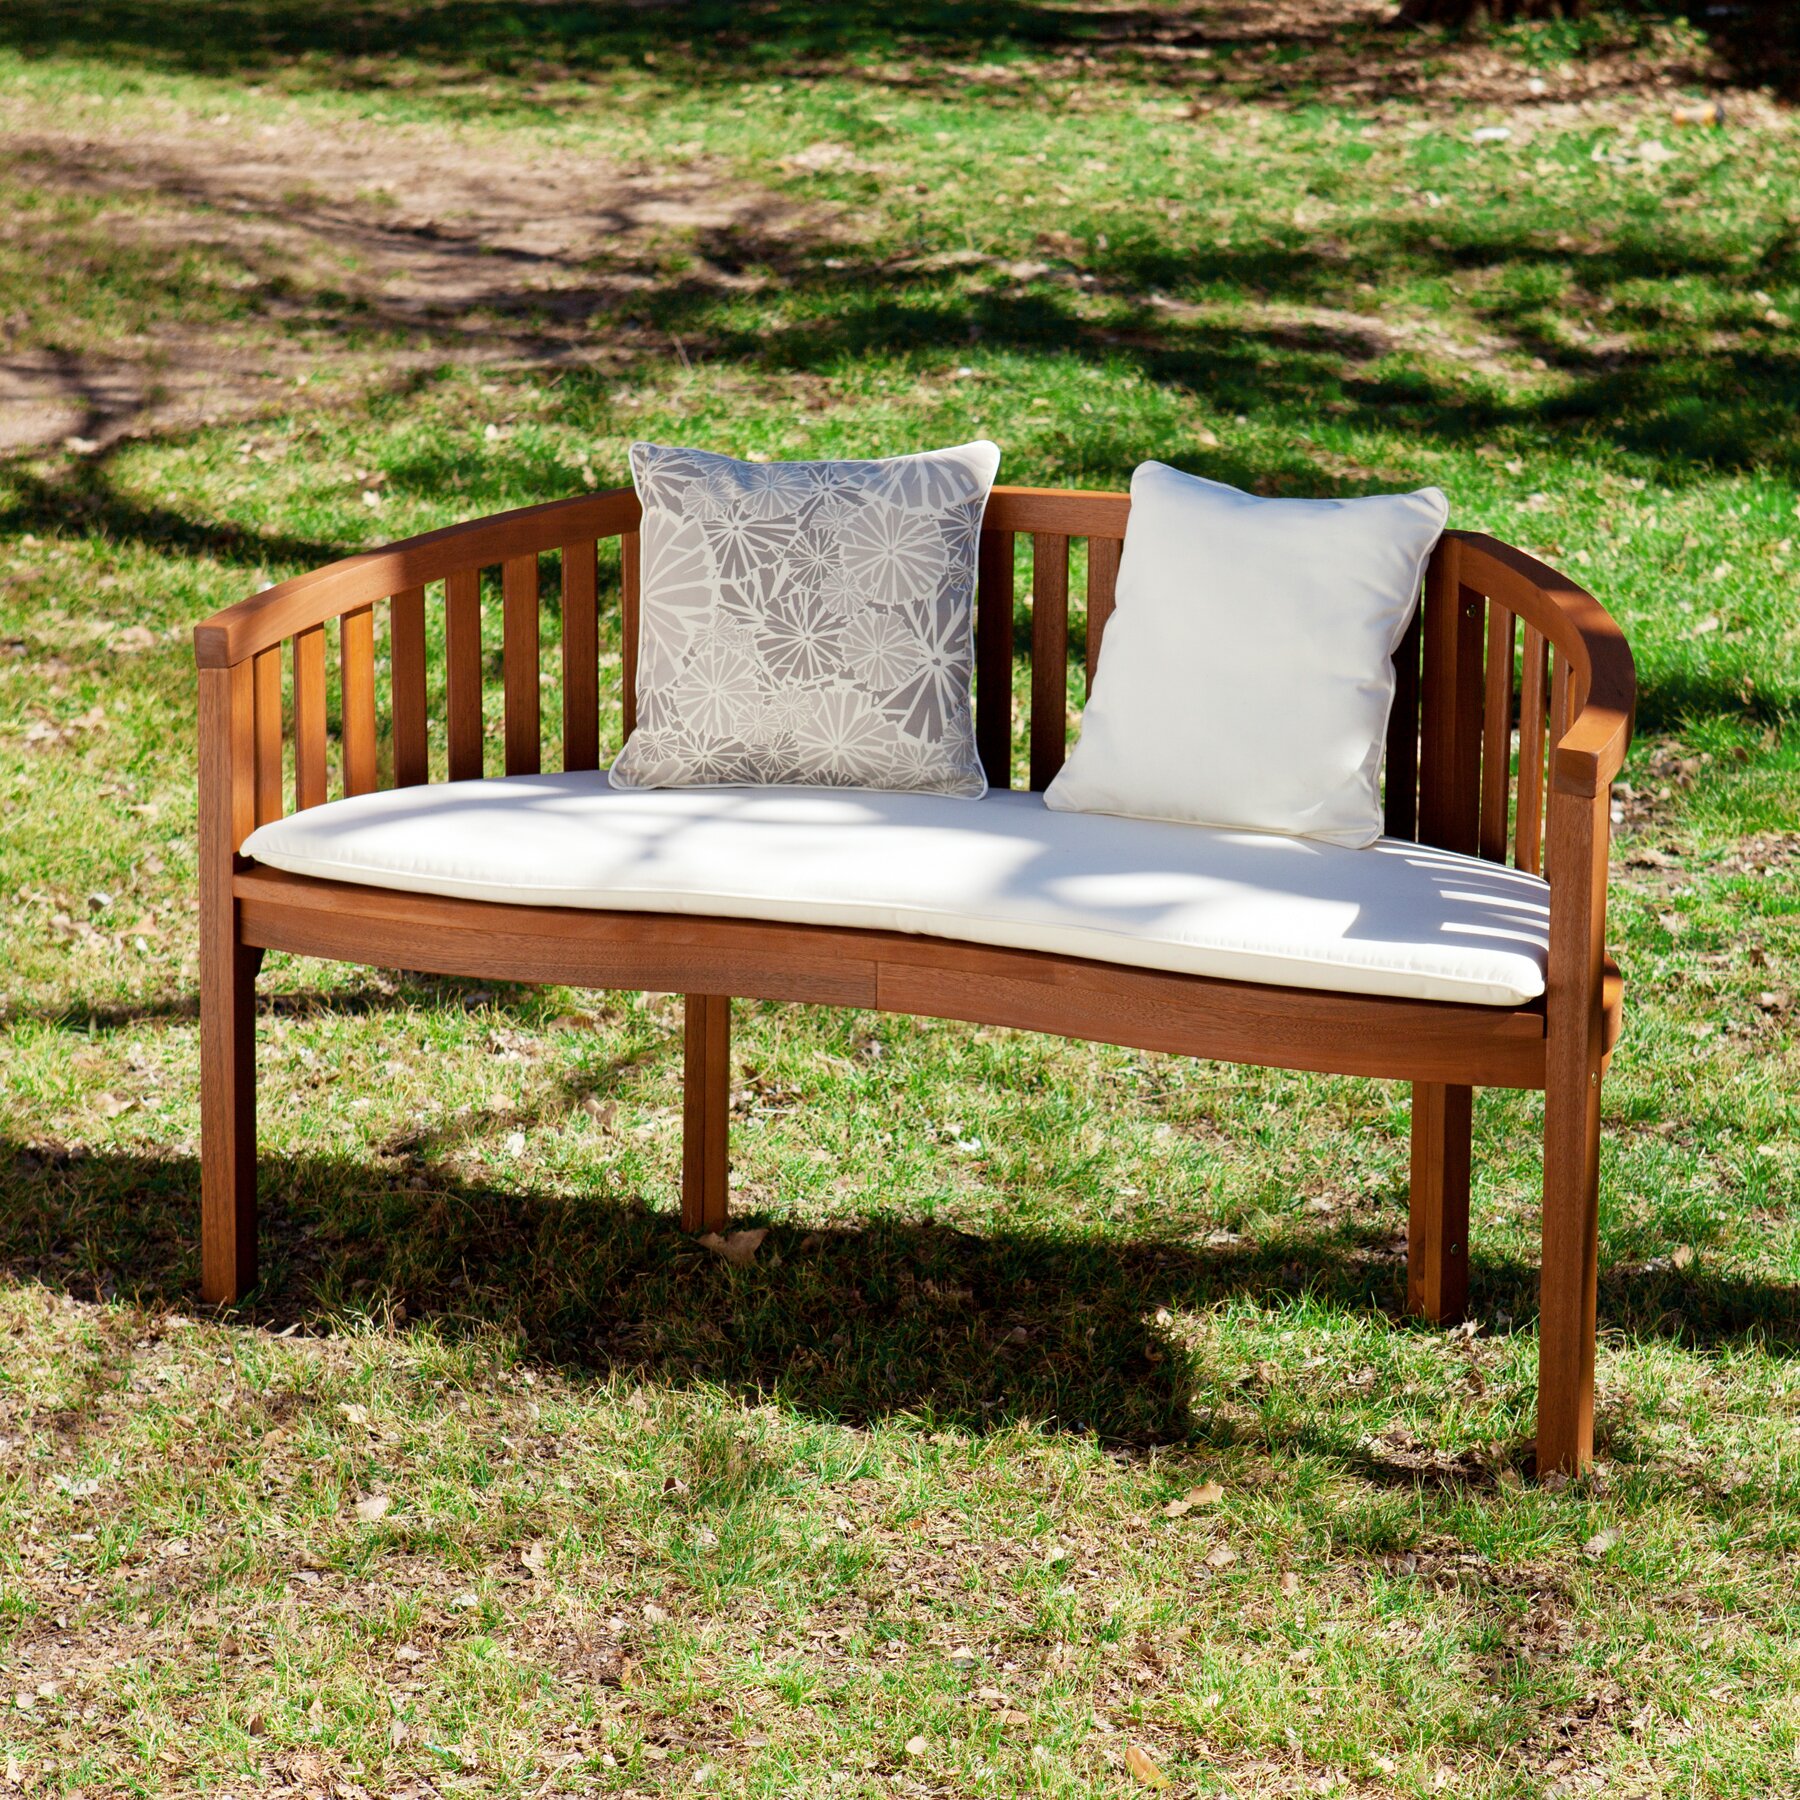 Darby Home Co Gridley Wood Garden Bench & Reviews | Wayfair